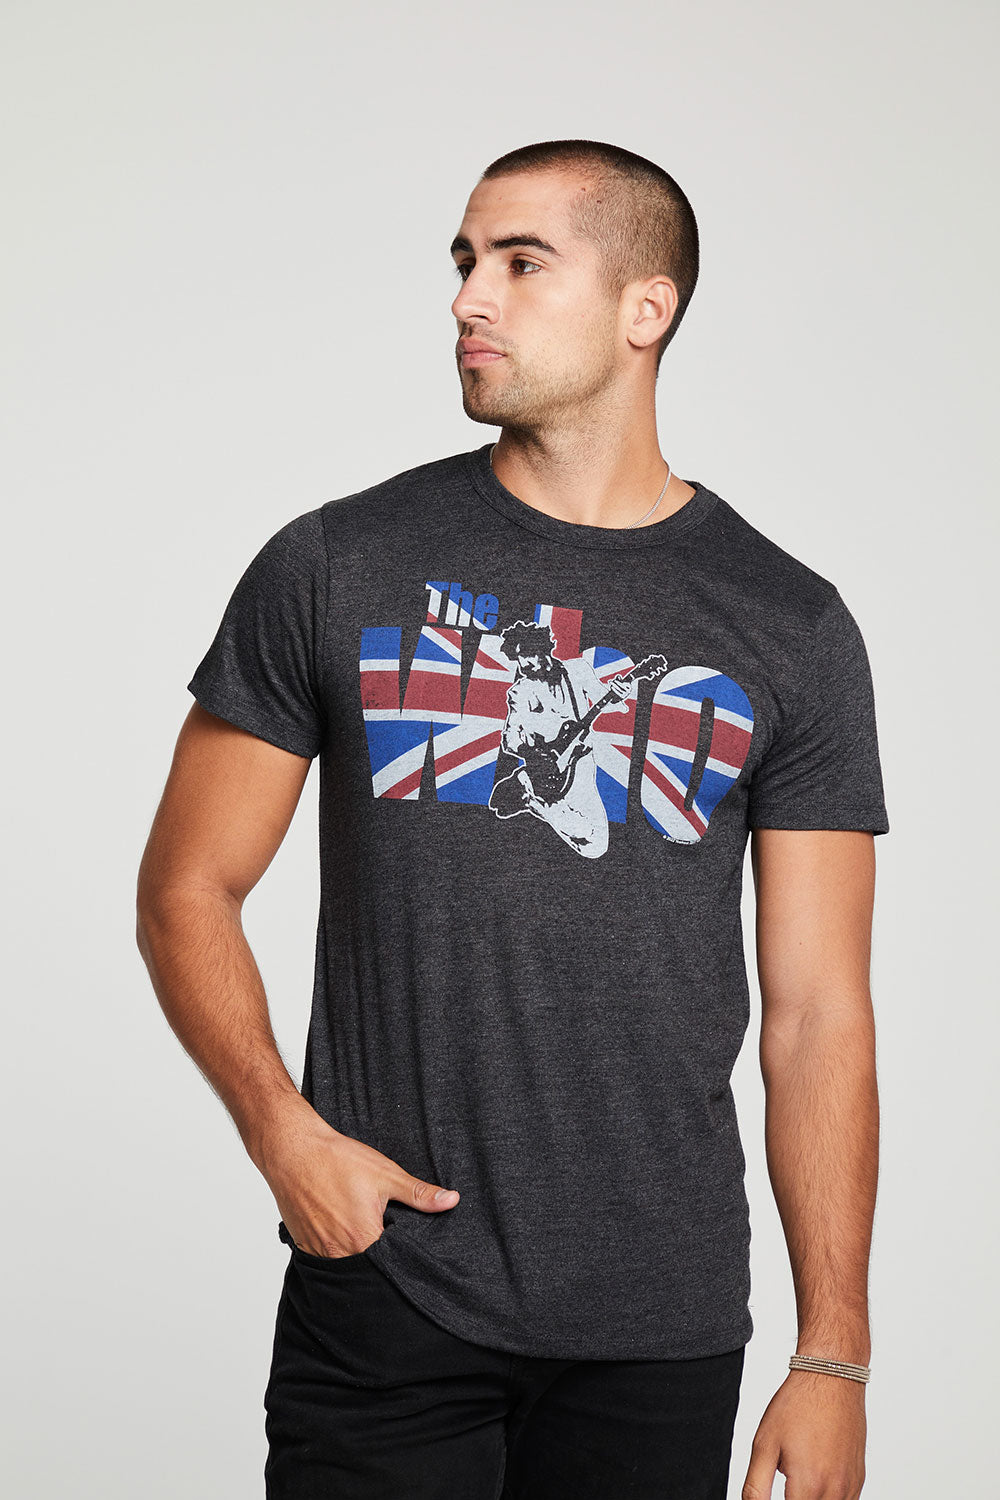 The Who Union Jack MENS chaserbrand